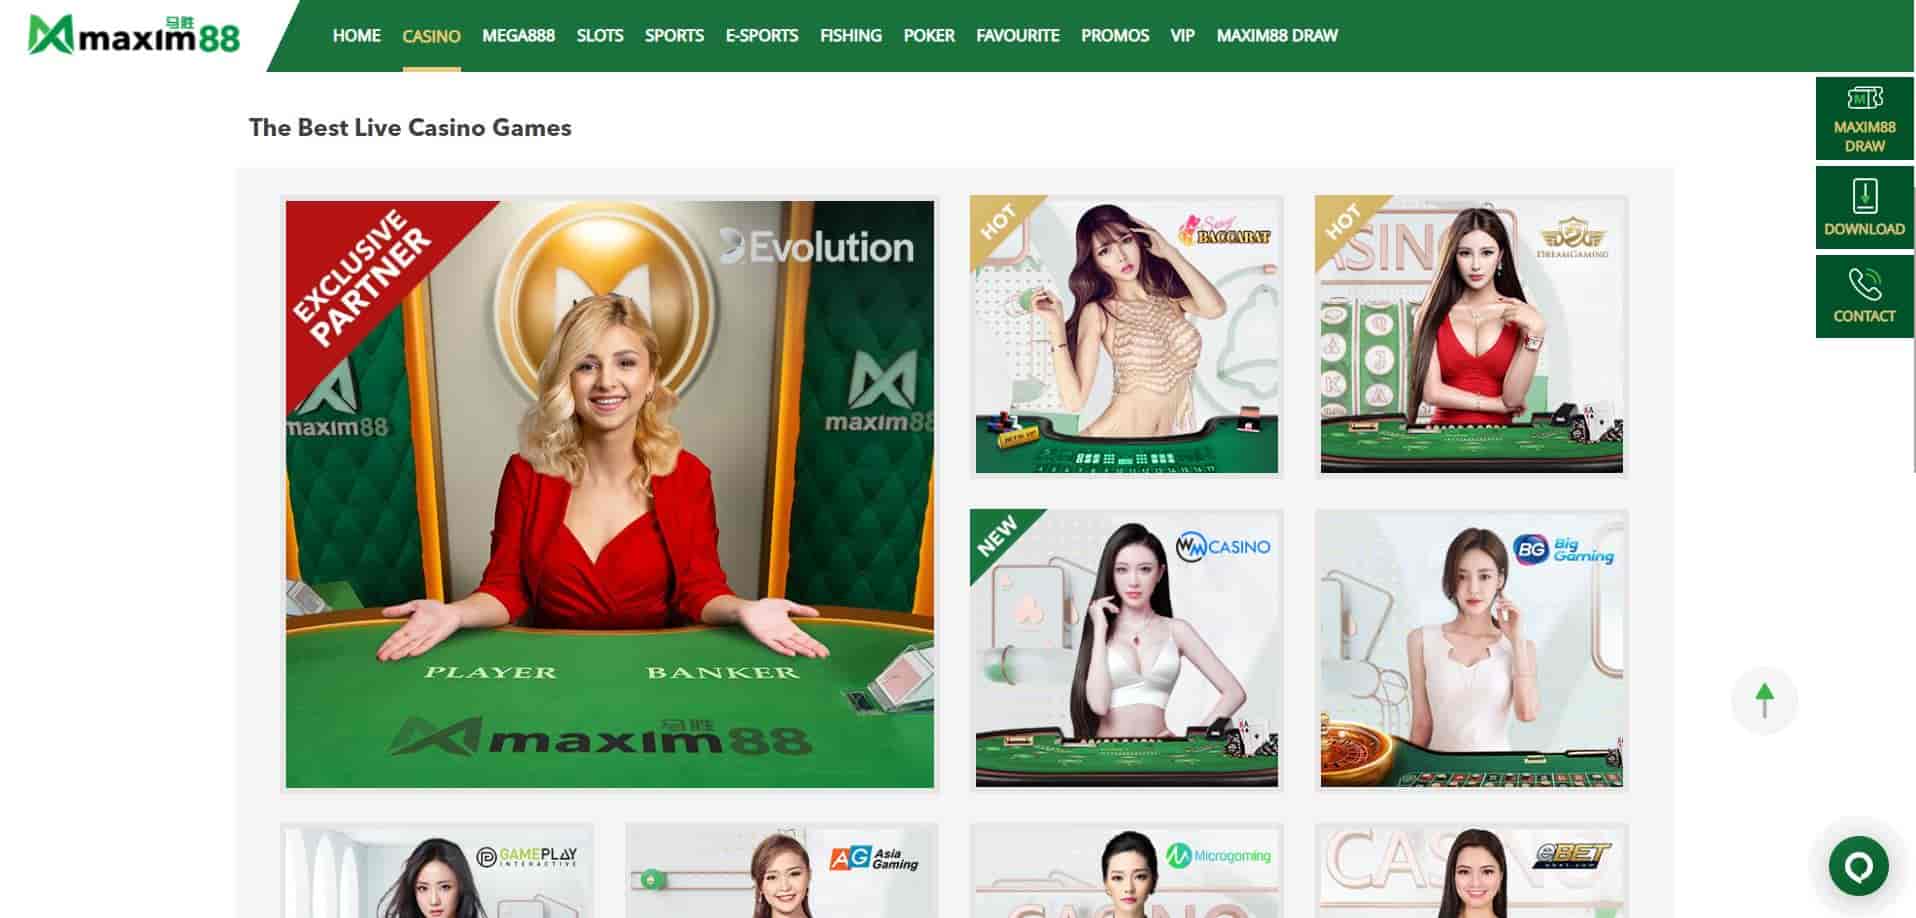 maxim88-Available-Games-Live-Casino